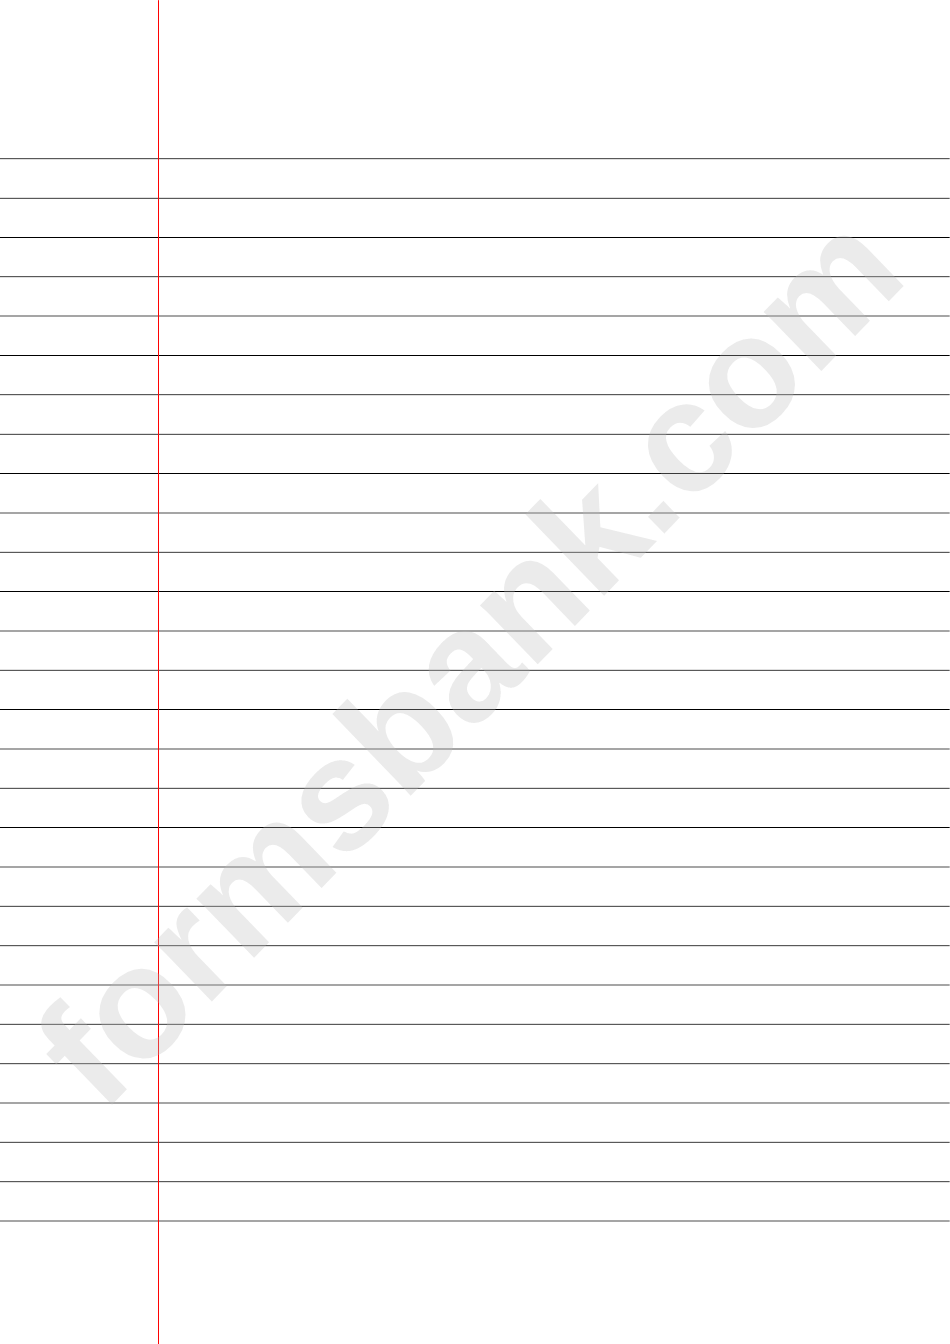 Wide Lined Paper Without Margins